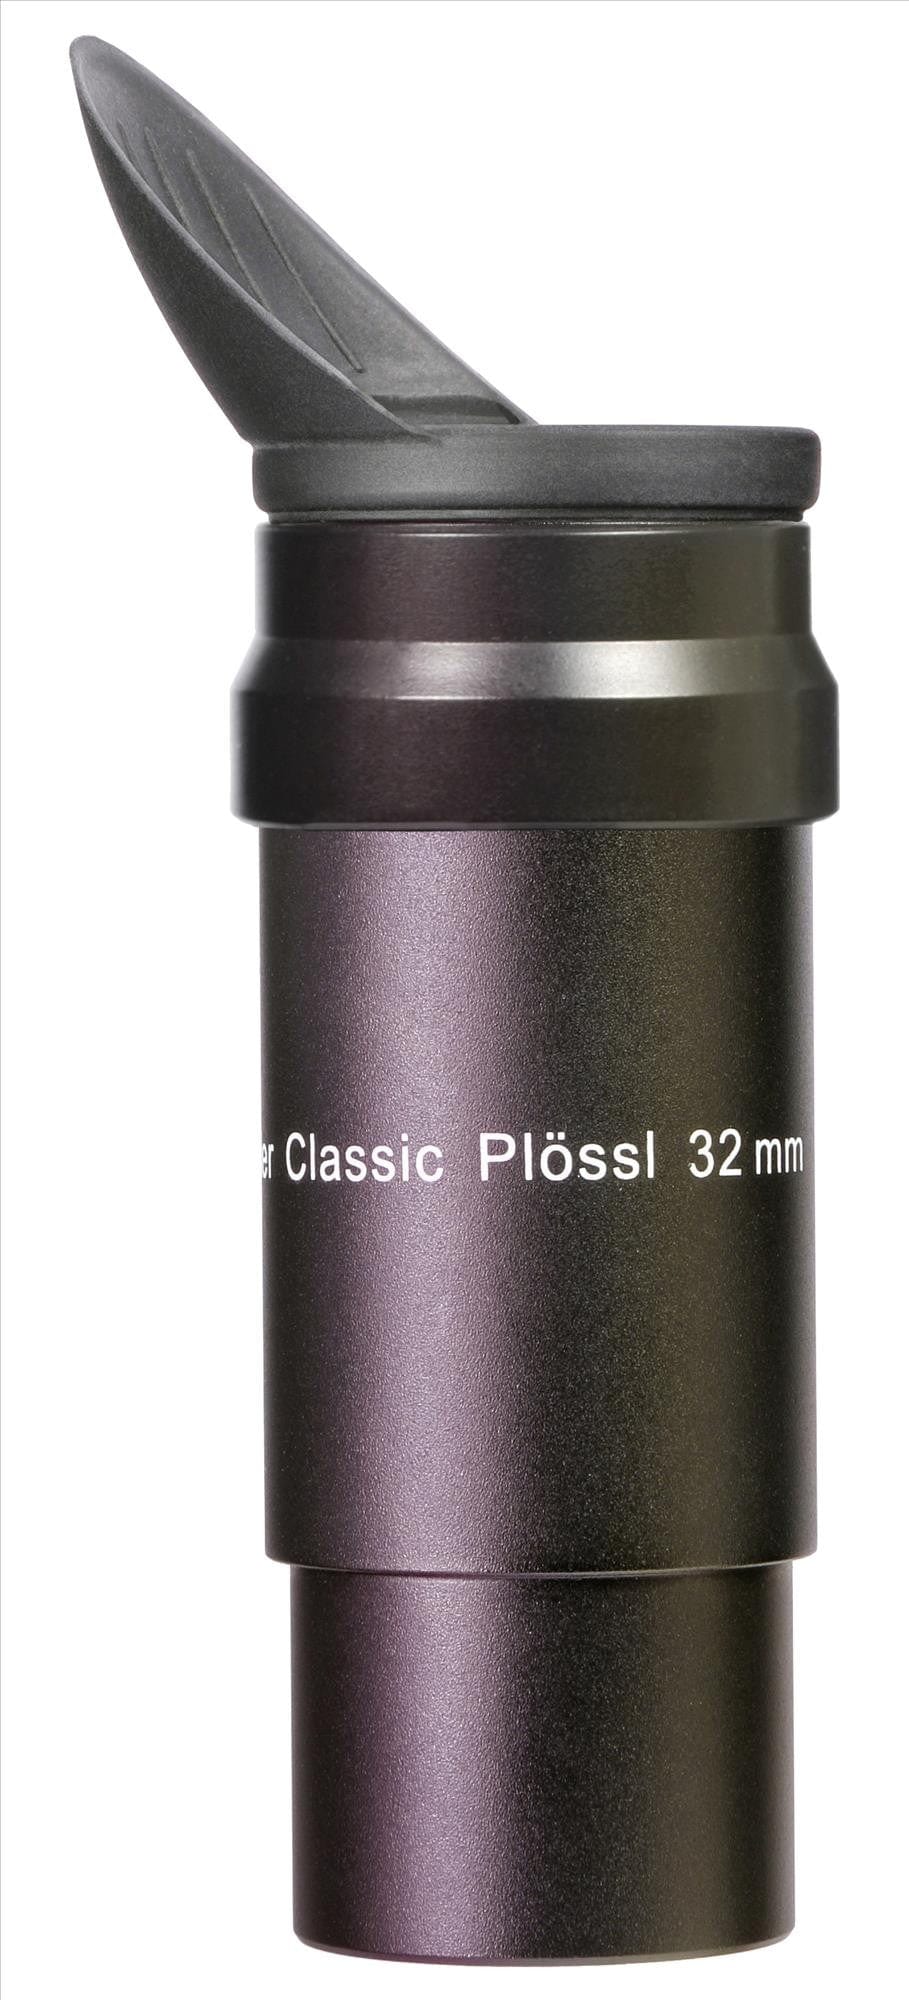 Baader Planetarium Accessory Baader Classic Plössl 32mm 1¼" Eyepiece (HT-MC) - With Aux Spacer Tube and Winged Rubber Eyecup - 2954132